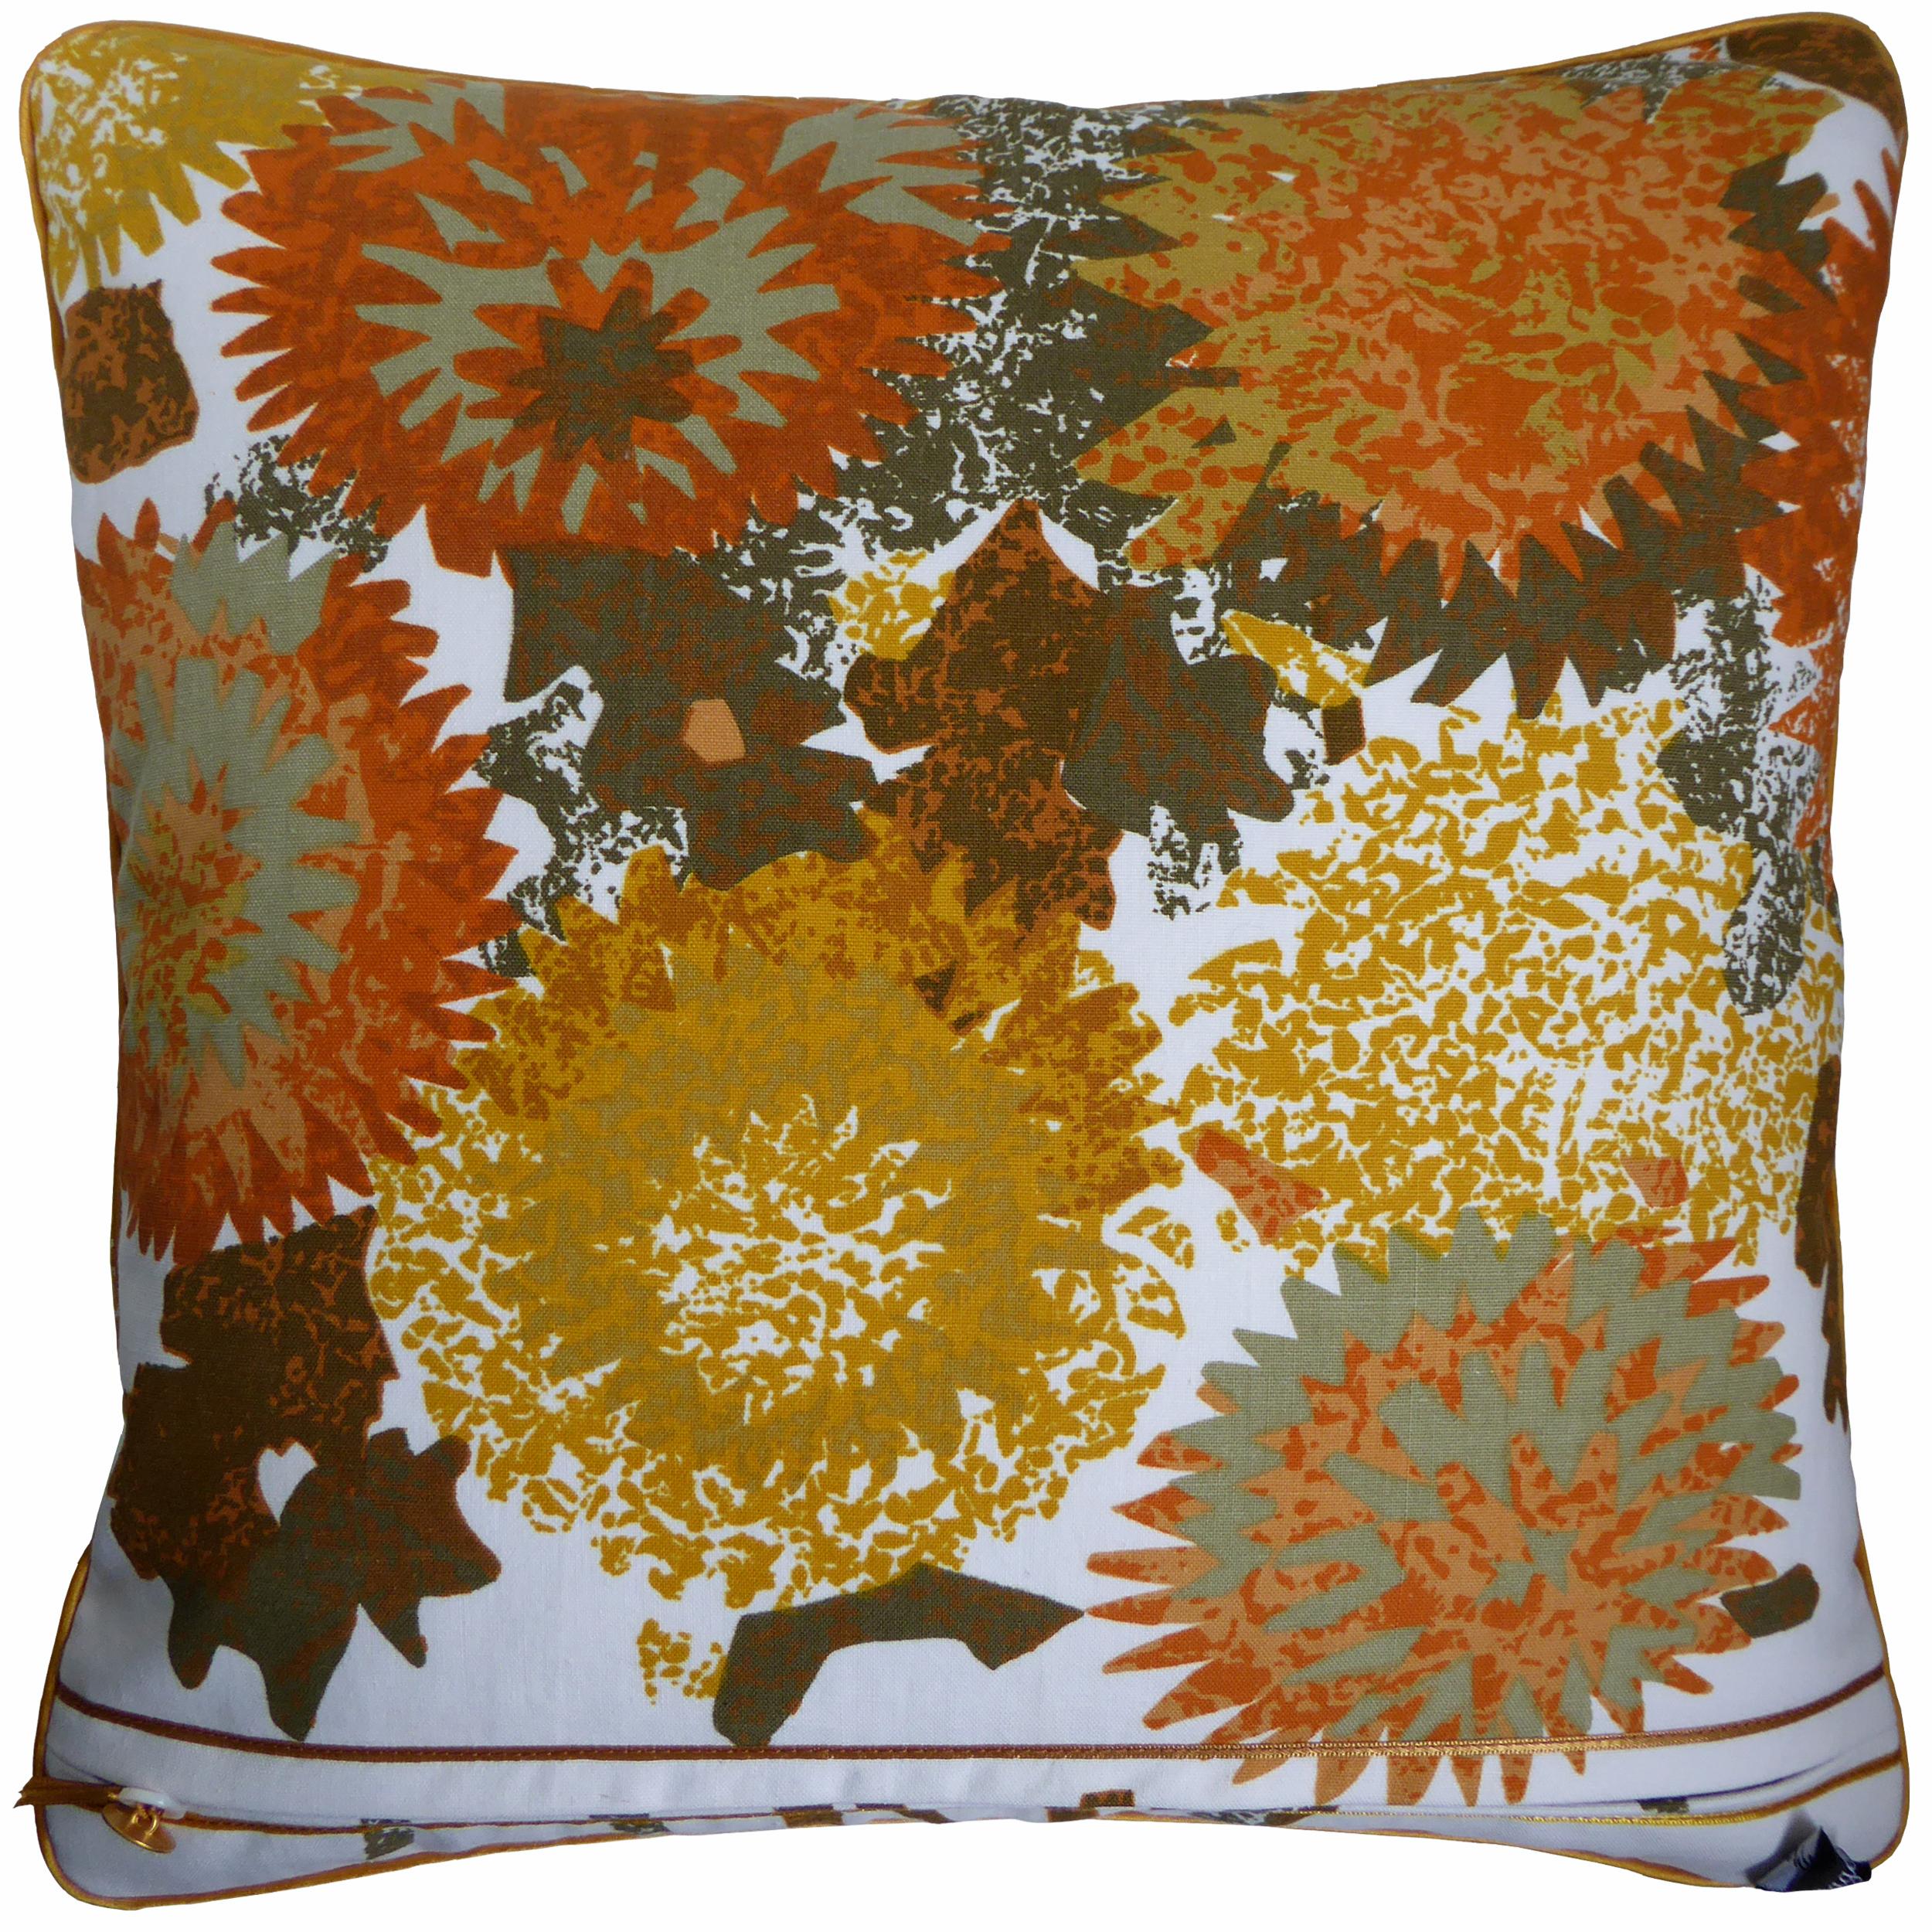 'Miranda'
circa 1960
British made luxury cushion created by using original vintage furnishing fabric by
Wardle & Co, a family company that dates back to the late 1800s and was responsible for printing techniques that attracted the Arts & Crafts